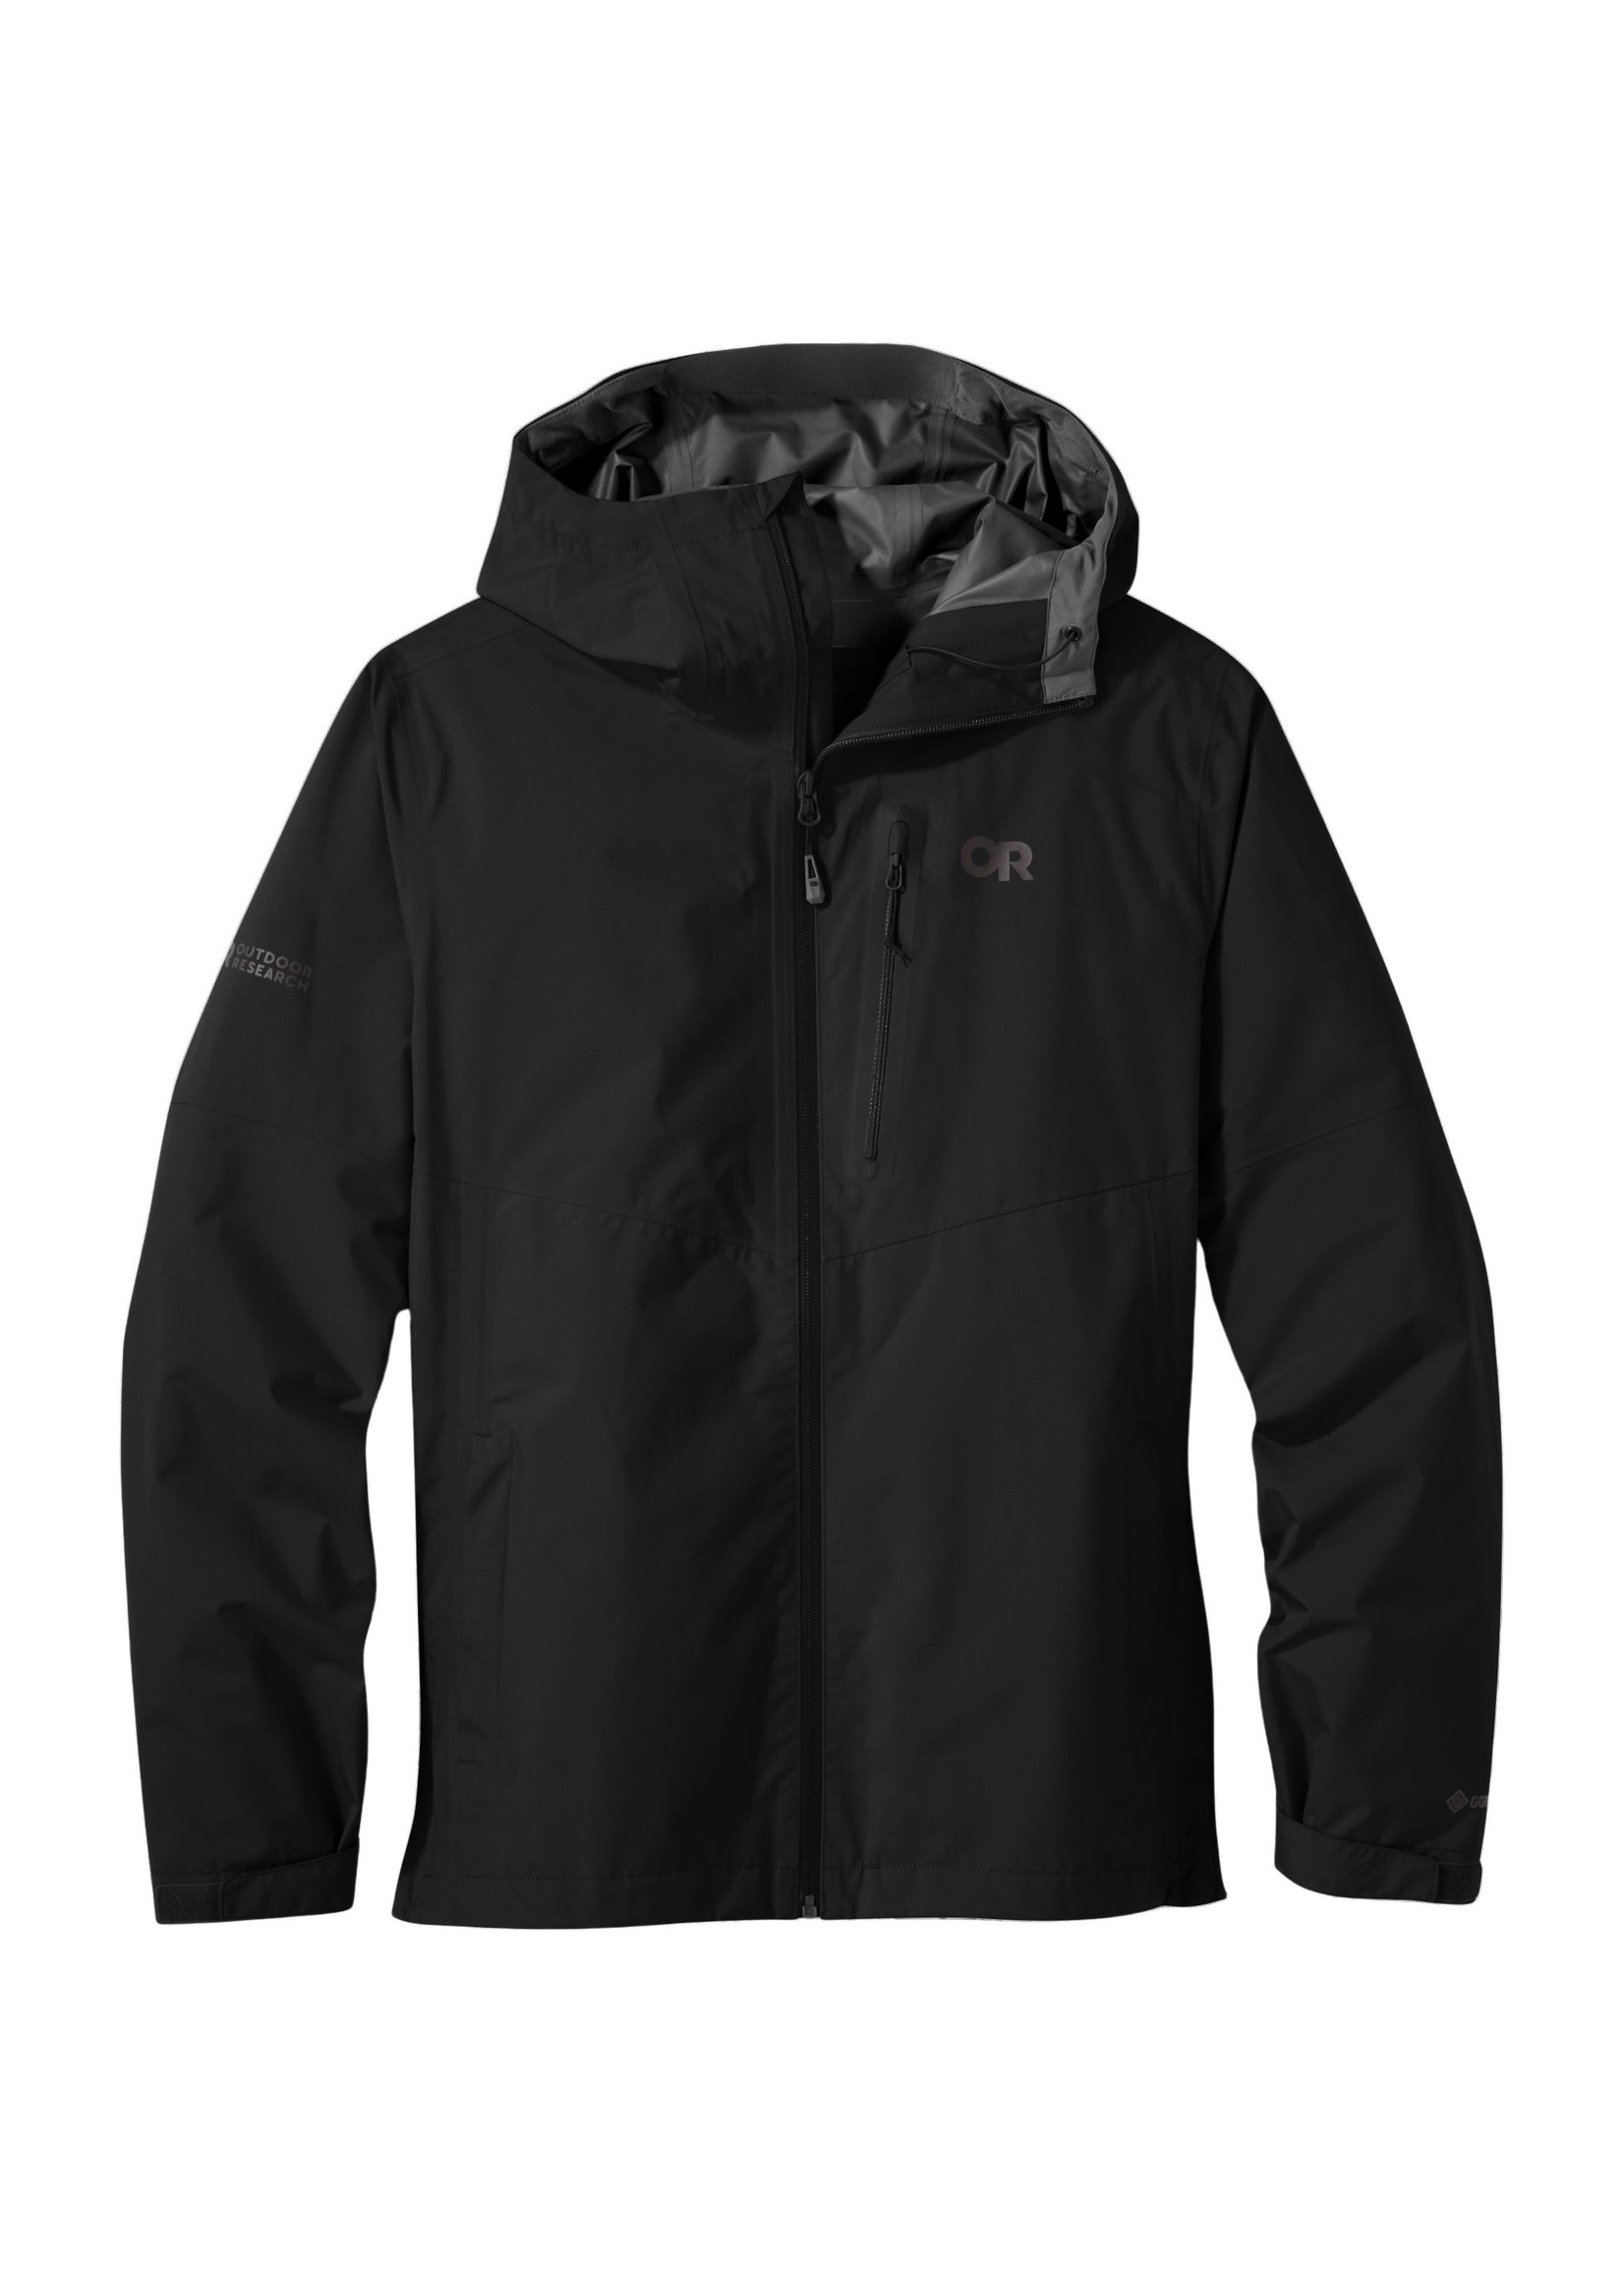 OUTDOOR RESEARCH FORAY II JACKET